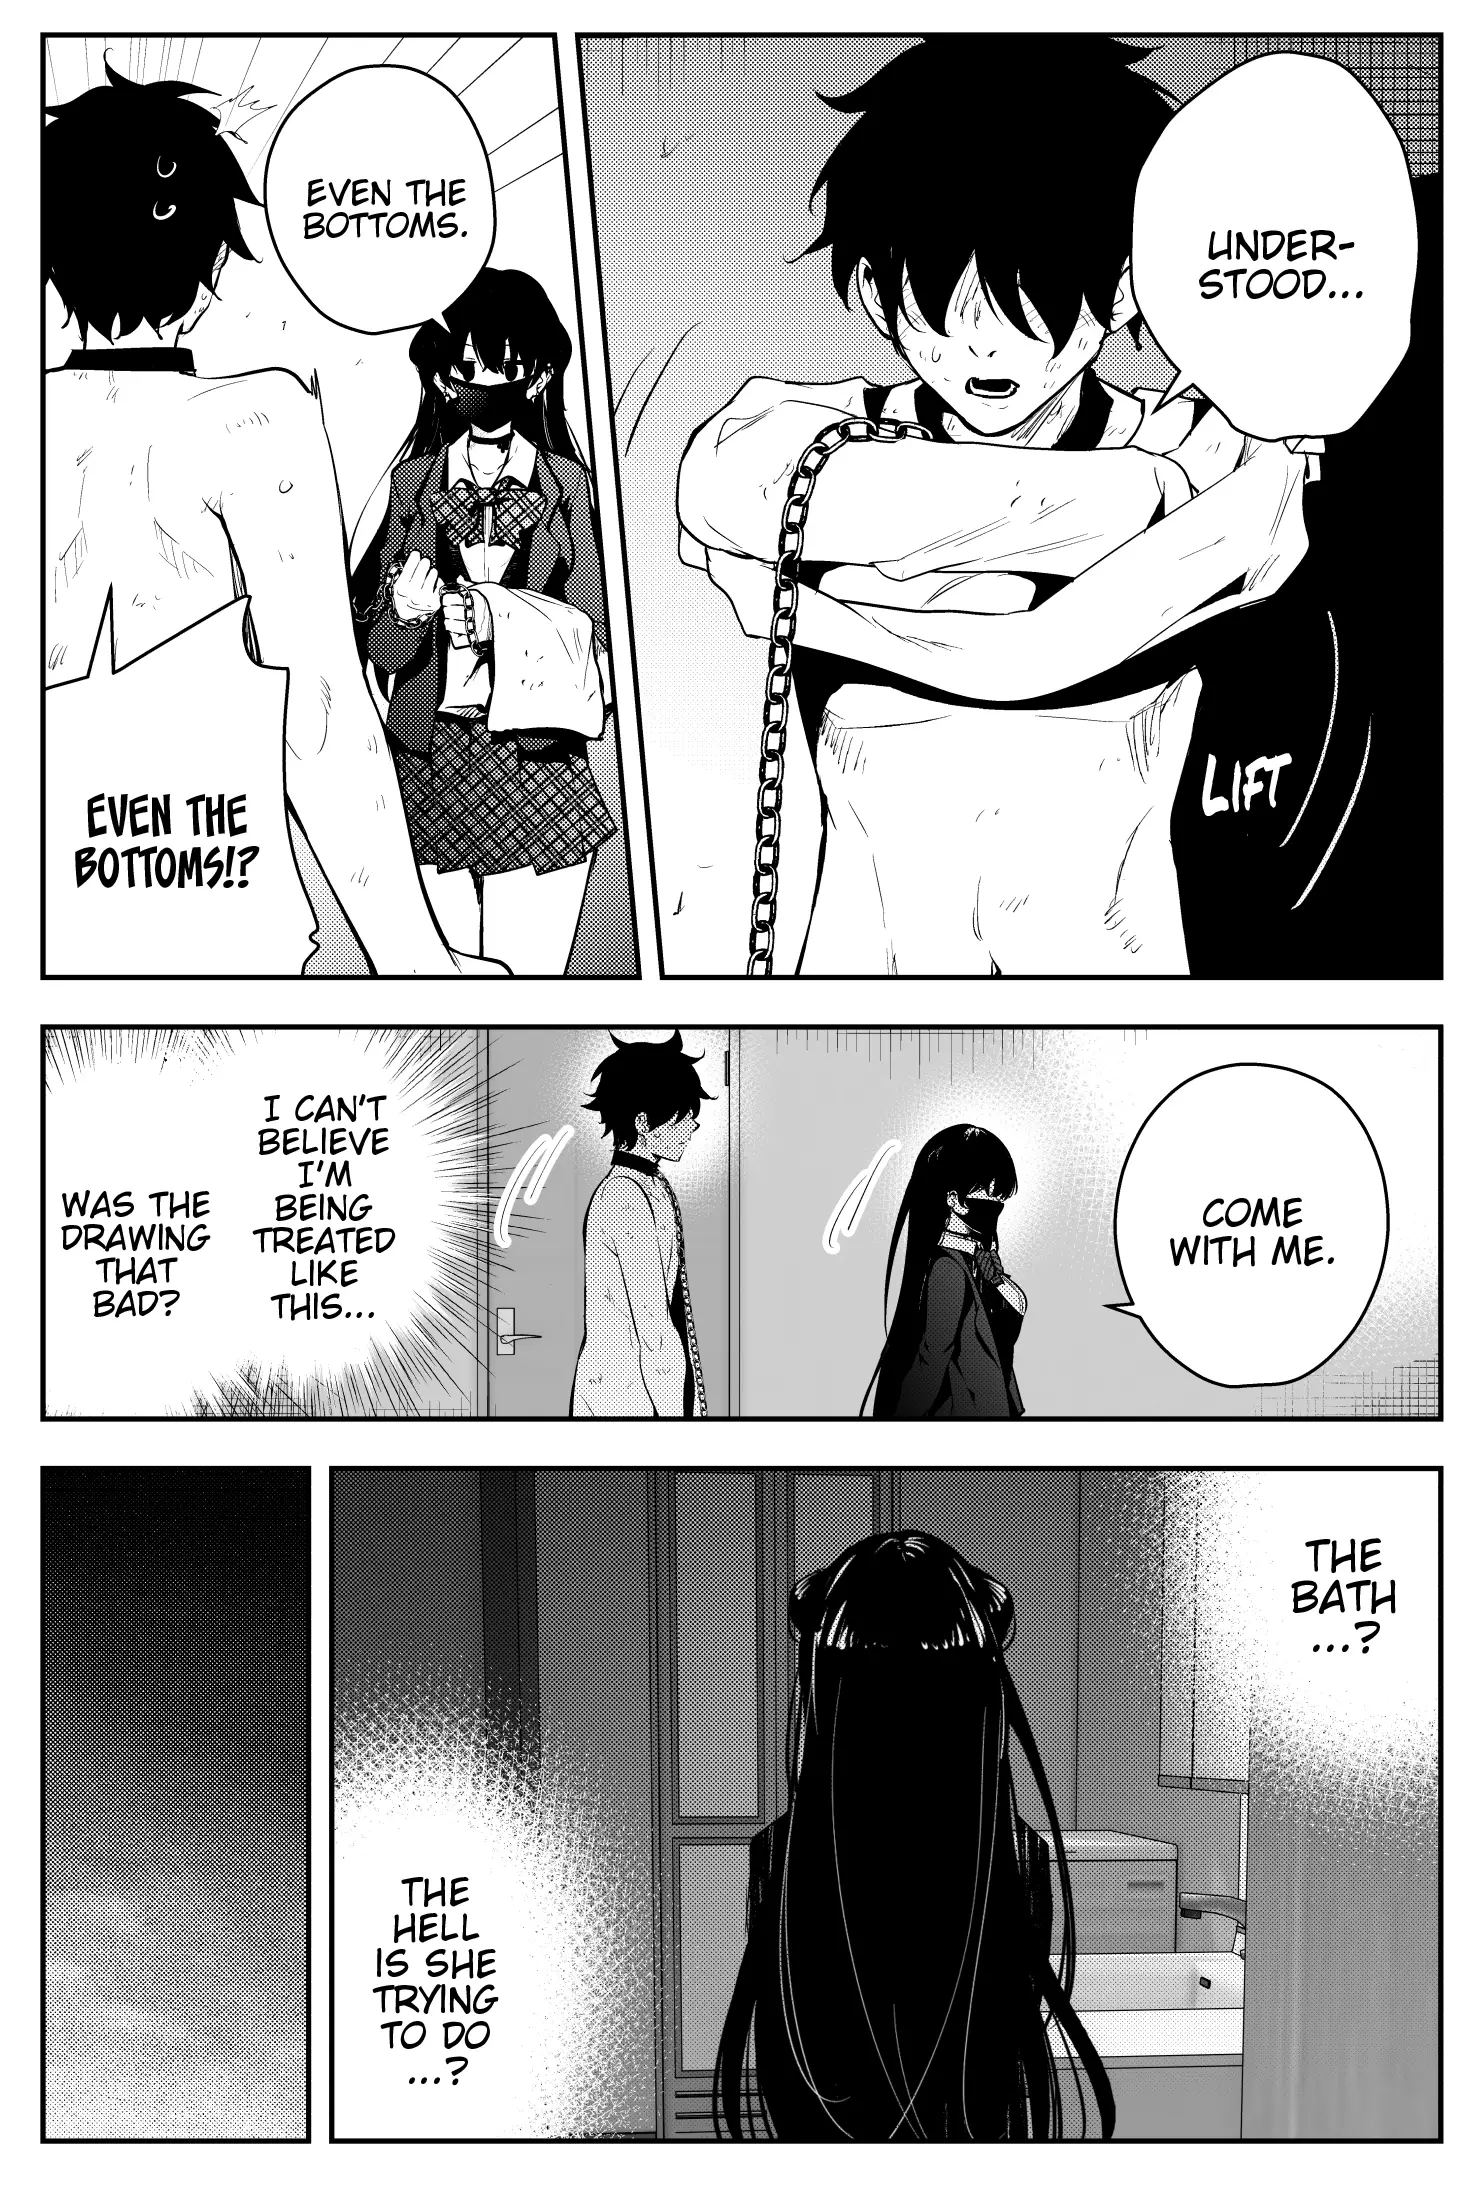 The Story Of A Manga Artist Confined By A Strange High School Girl - 4 page 3-79700828